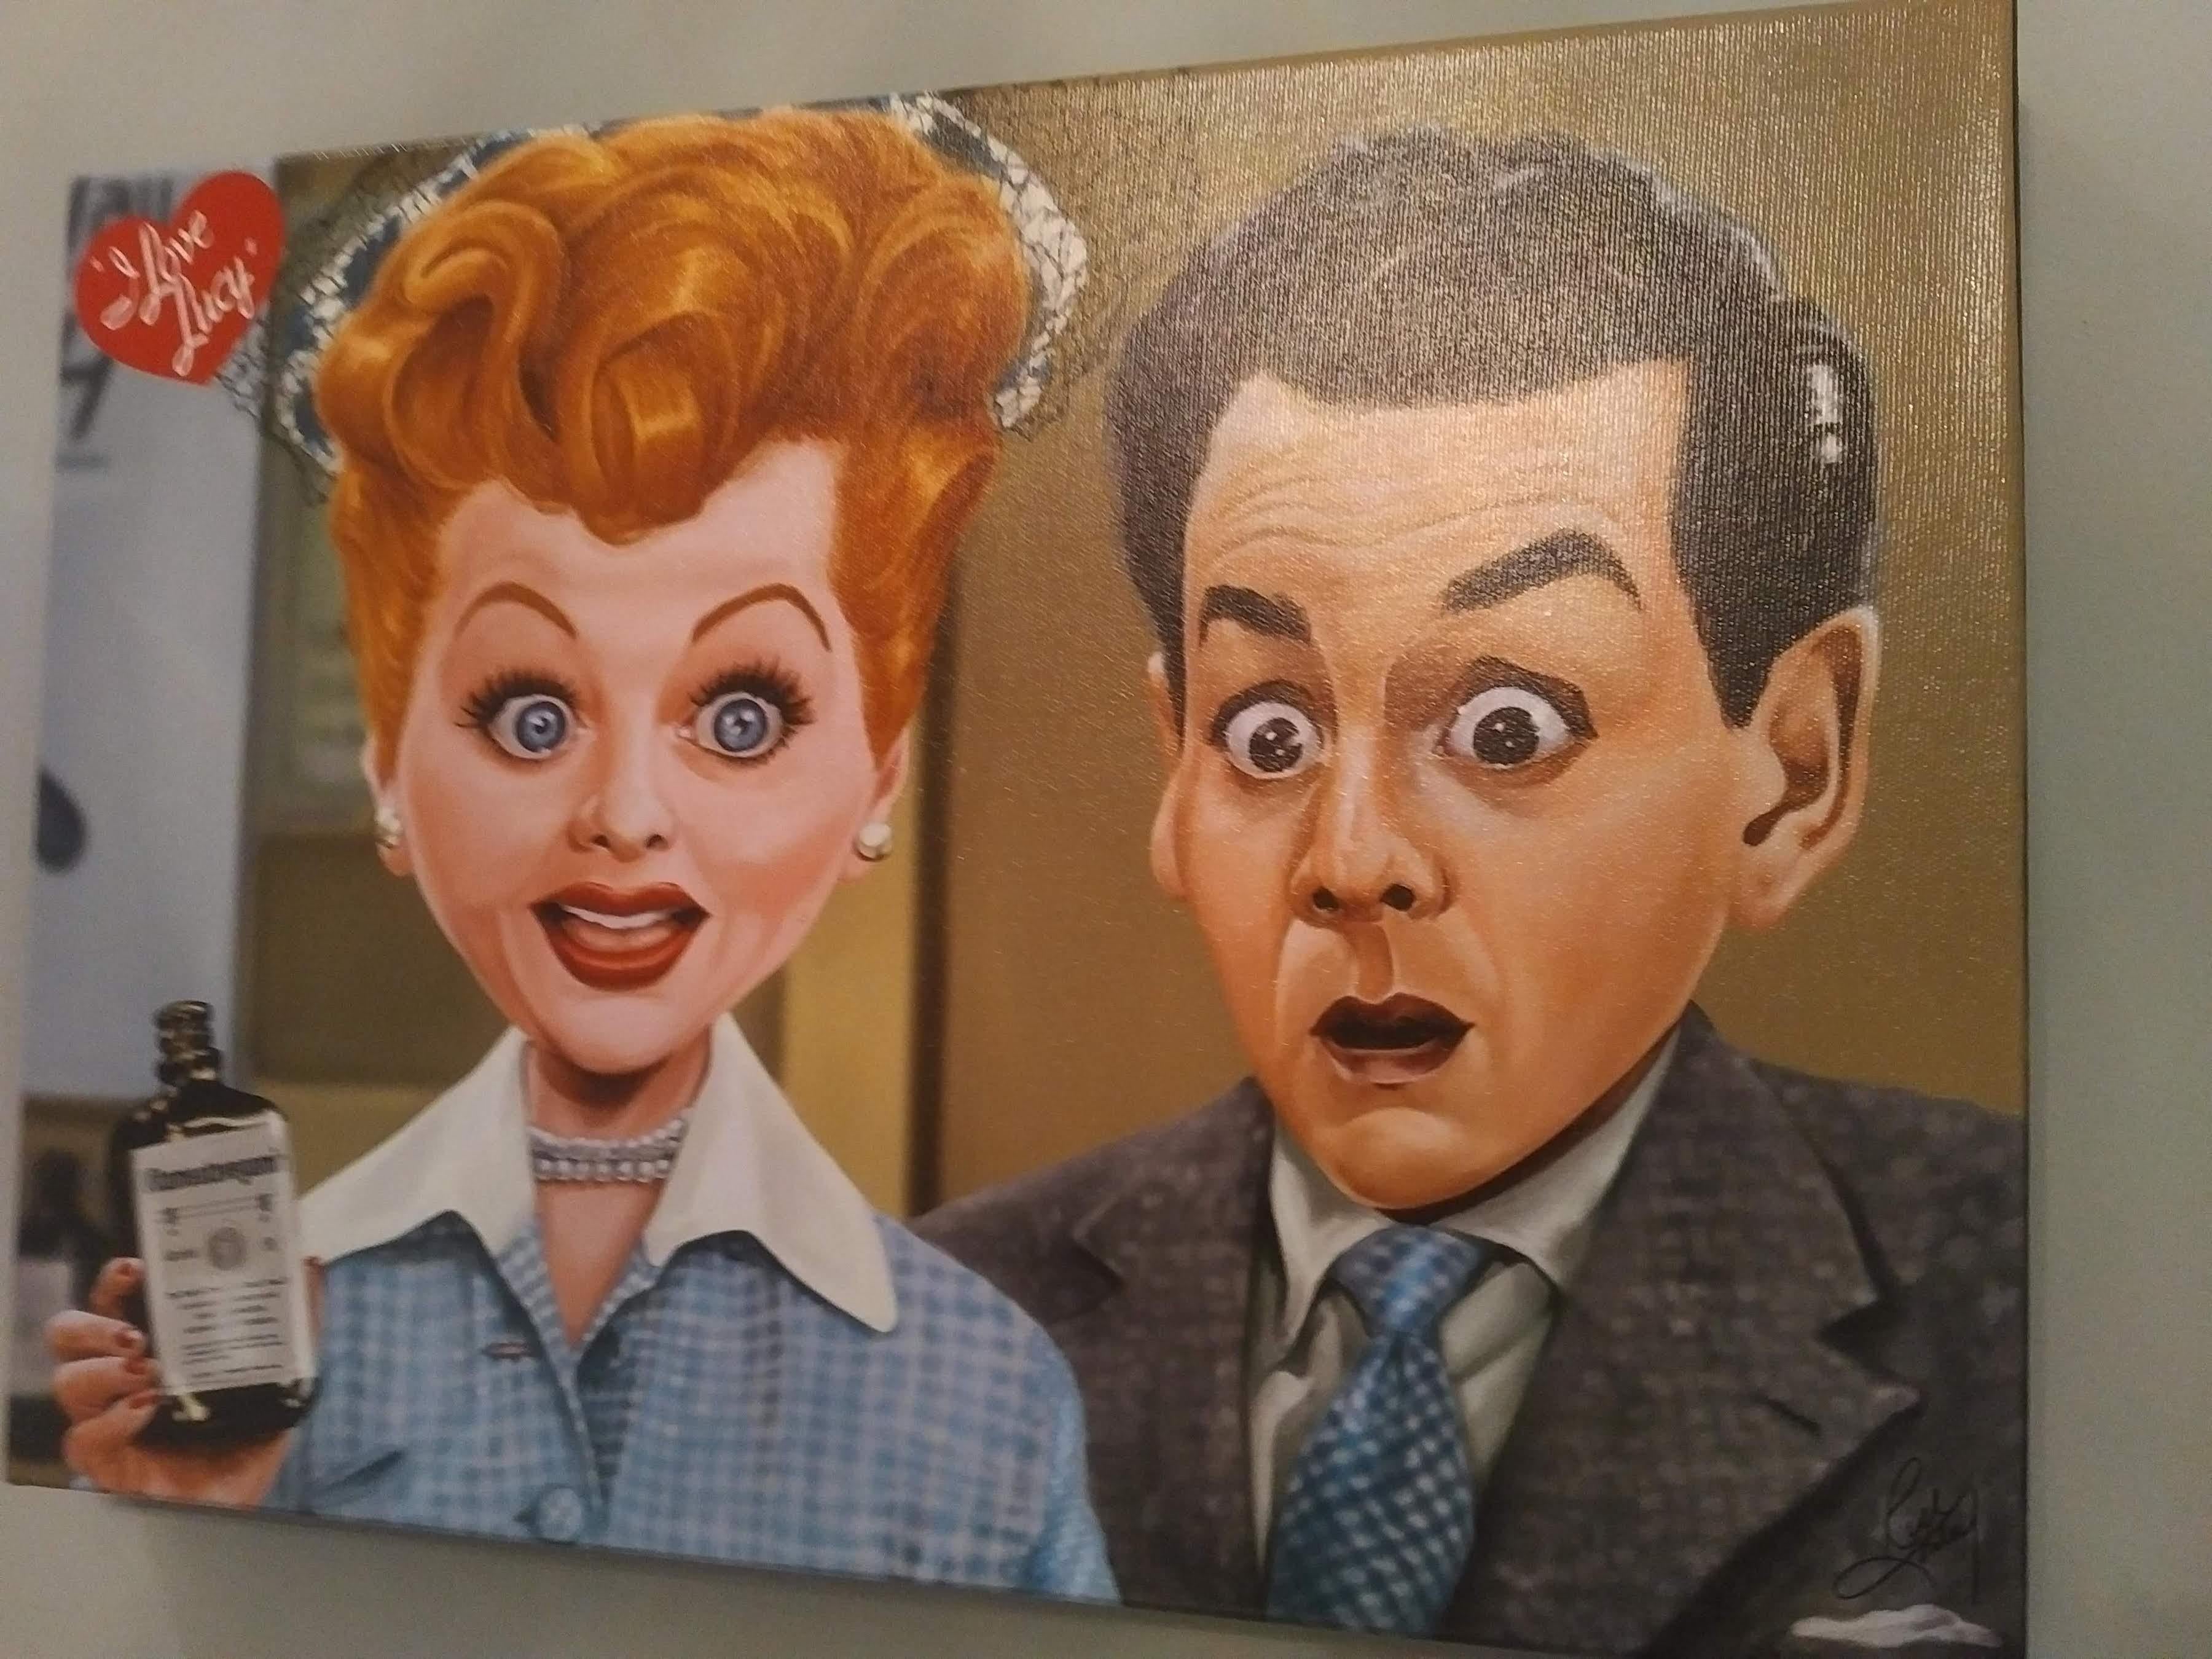 Rich Conley is regarded as one of this generation's foremost caricaturists.  Conley is an authorized, licensed artist of The Three Stooges (C3 Entertainment) and I Love Lucy (Unforgettable Licensing, Desilu too and CBS Broadcasting), amongst others.